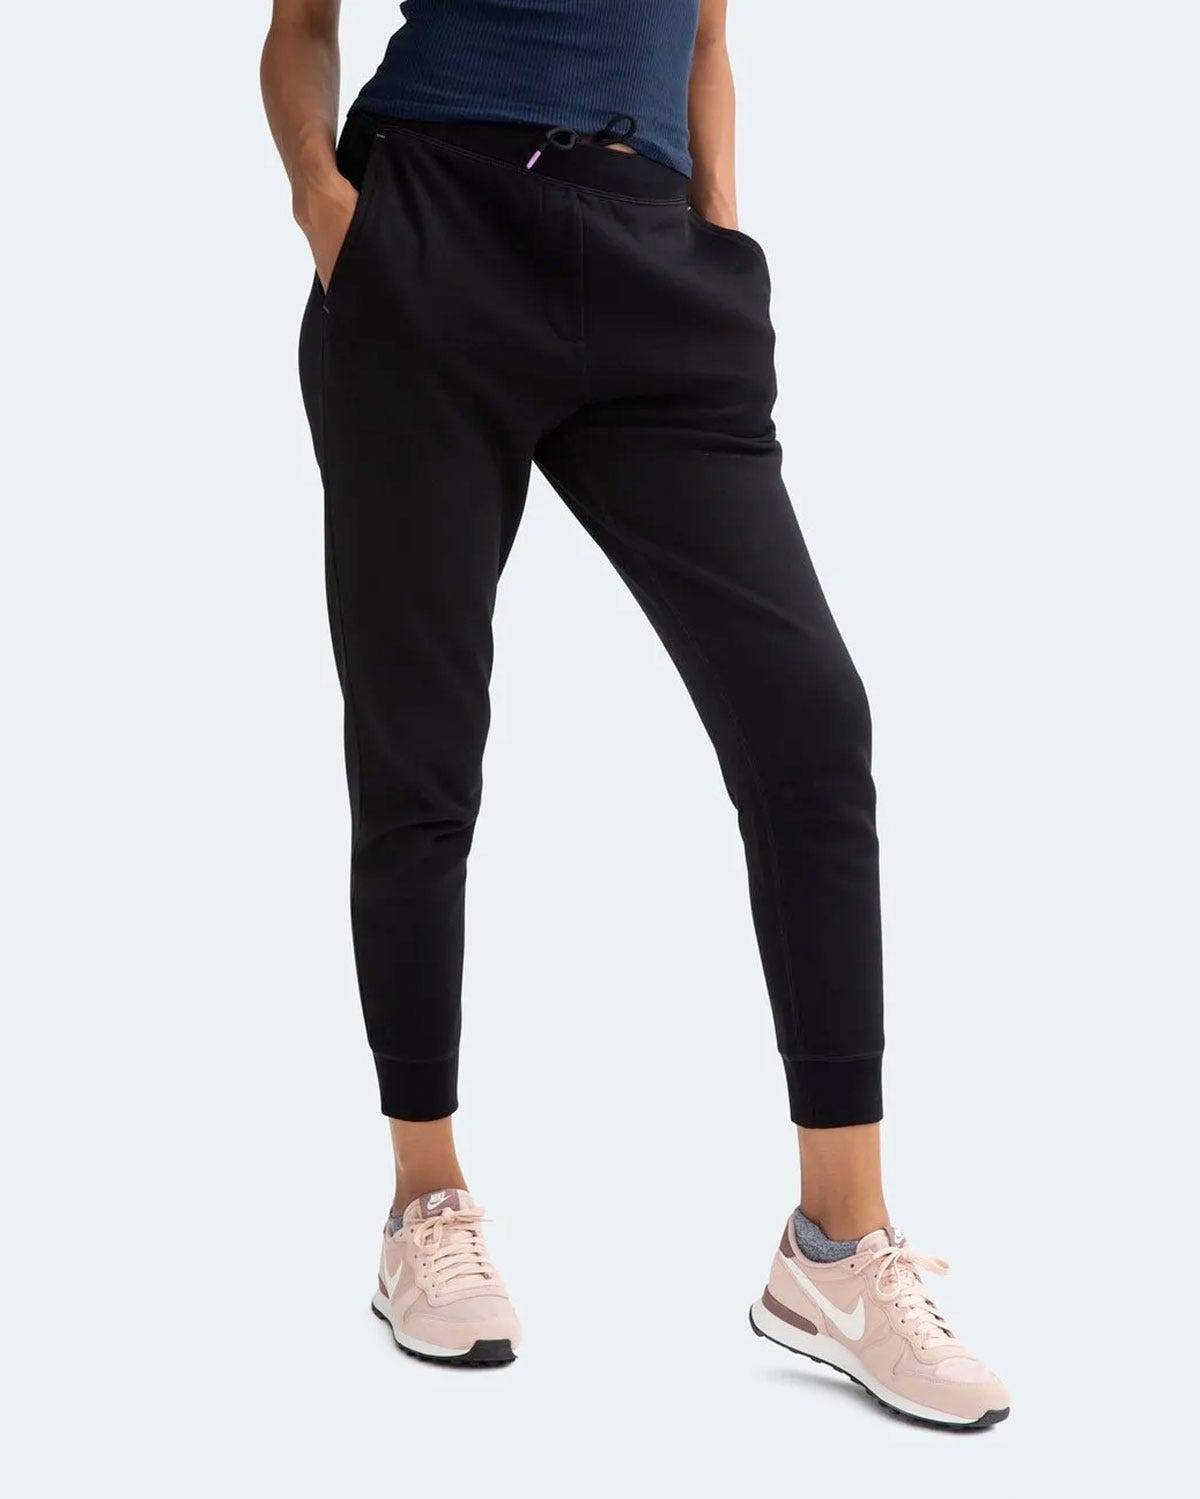 7 pairs of sweatpants that are cute enough to wear for errands but